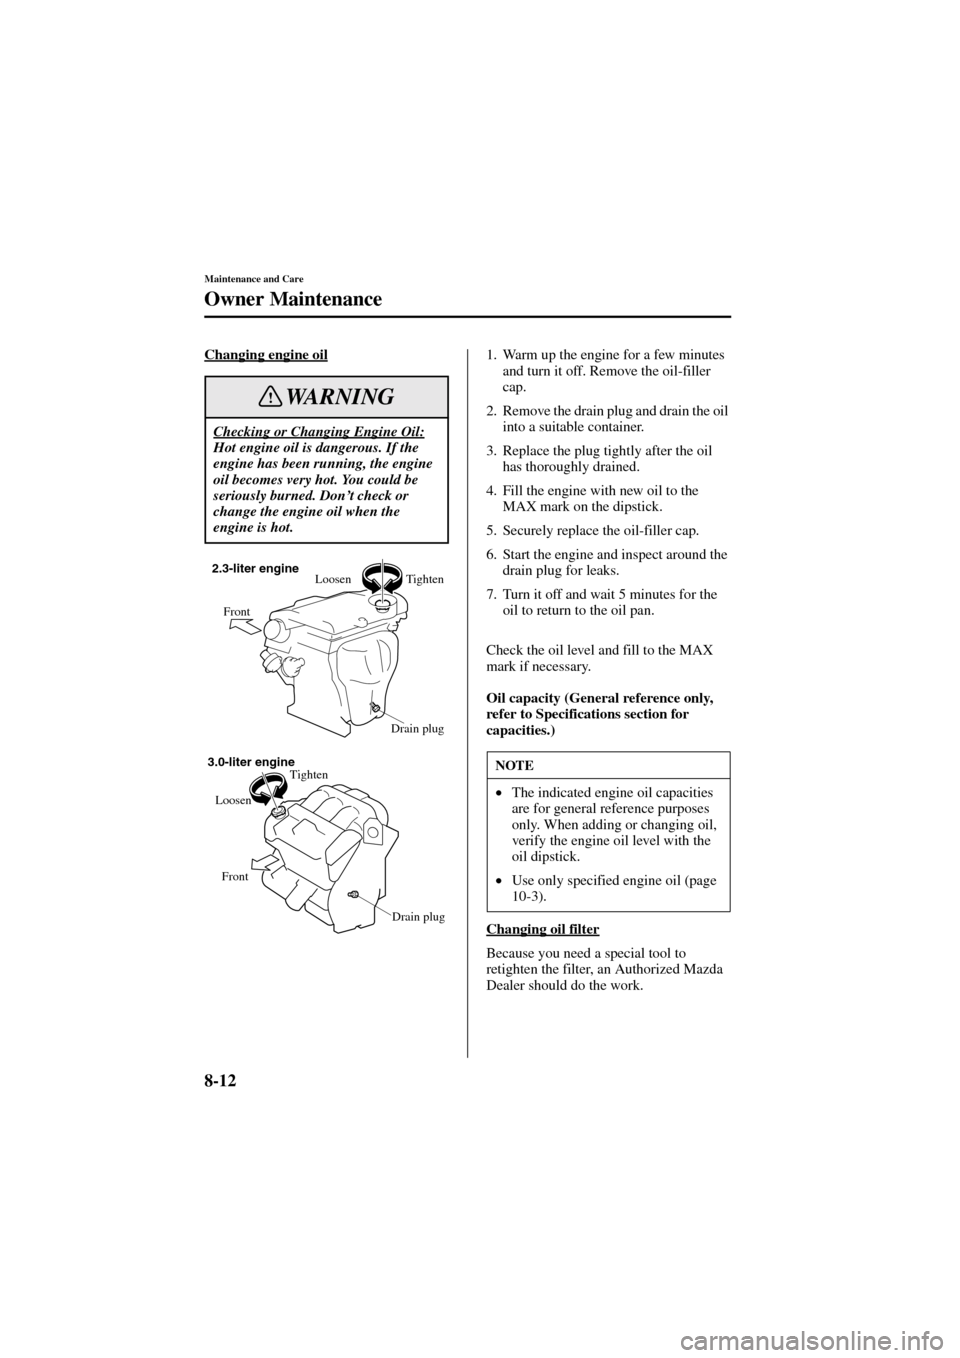 MAZDA MODEL 6 2004   (in English) User Guide 8-12
Maintenance and Care
Owner Maintenance
Form No. 8R29-EA-02I
Changing engine oil1. Warm up the engine for a few minutes 
and turn it off. Remove the oil-filler 
cap.
2. Remove the drain plug and d